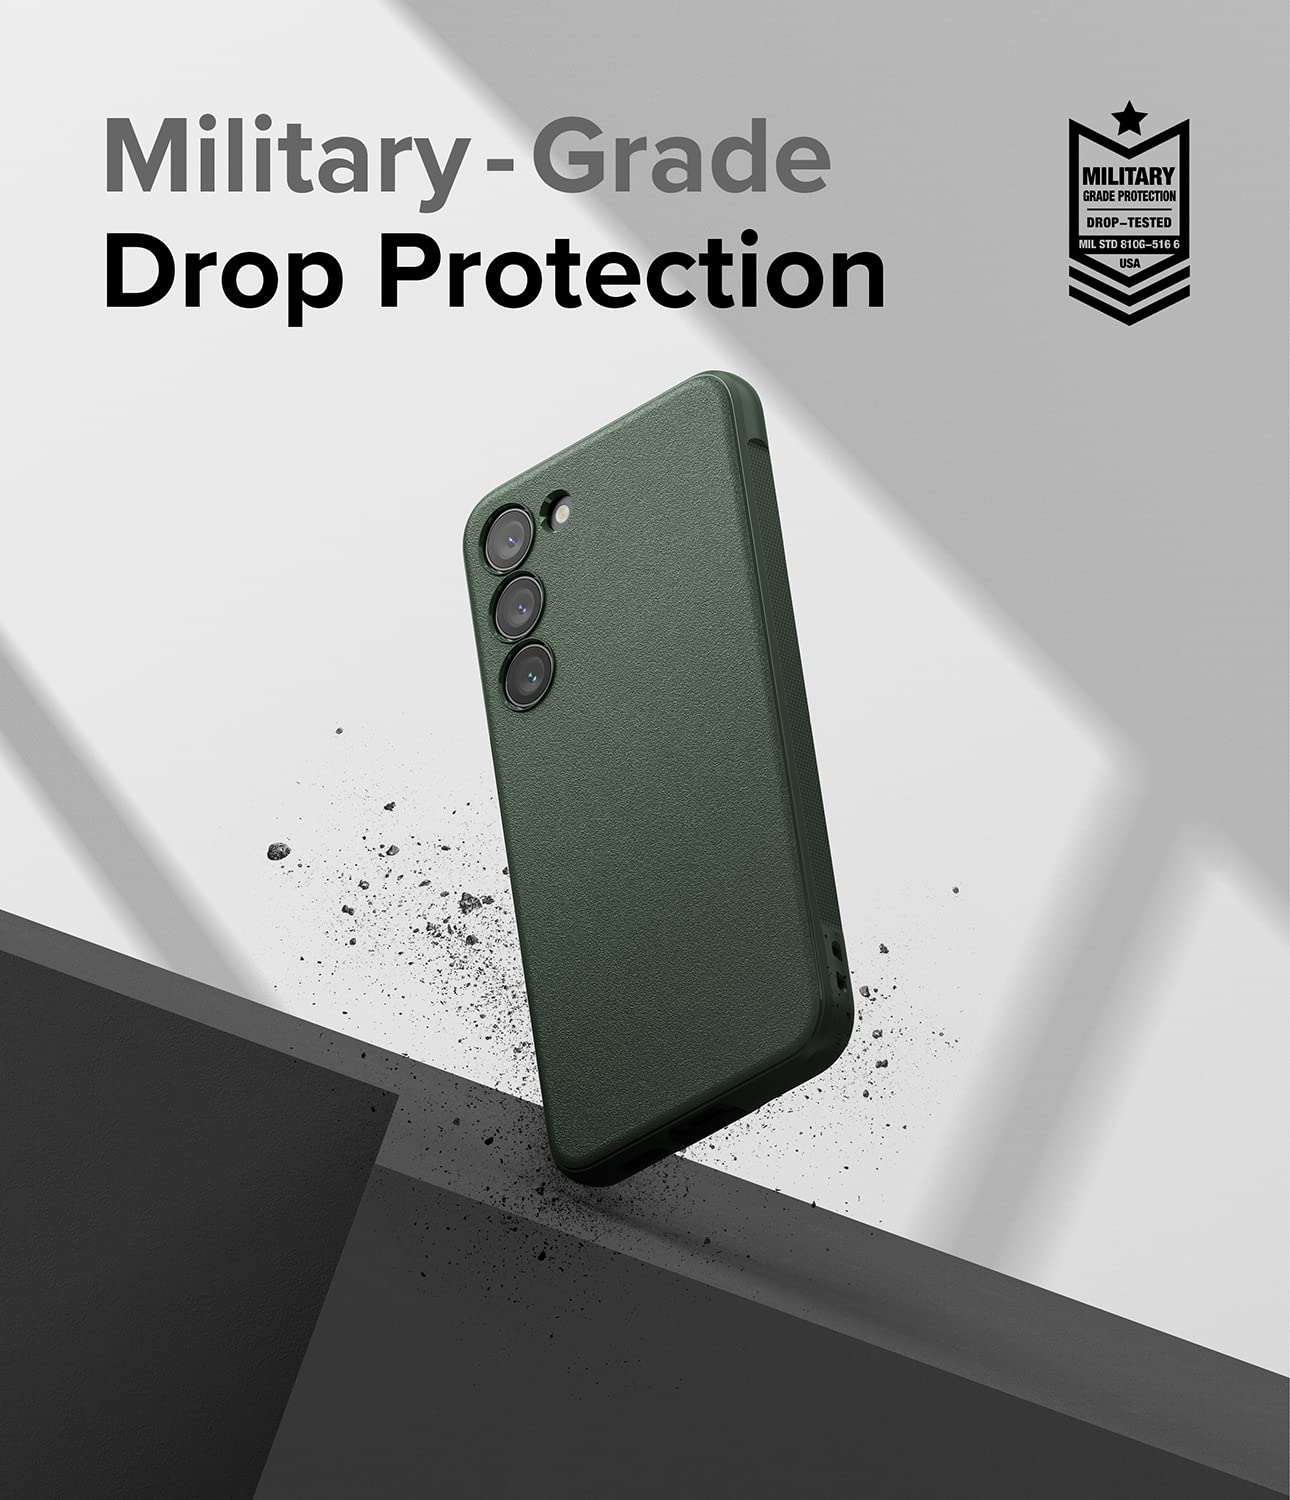 Ringke Onyx [Feels Good in The Hand] Compatible with Samsung Galaxy S23 Case 5G, Anti-Fingerprint Technology Non-Slip Enhanced Grip Smudge Proof Cover Designed for S23 Case - Dark Green